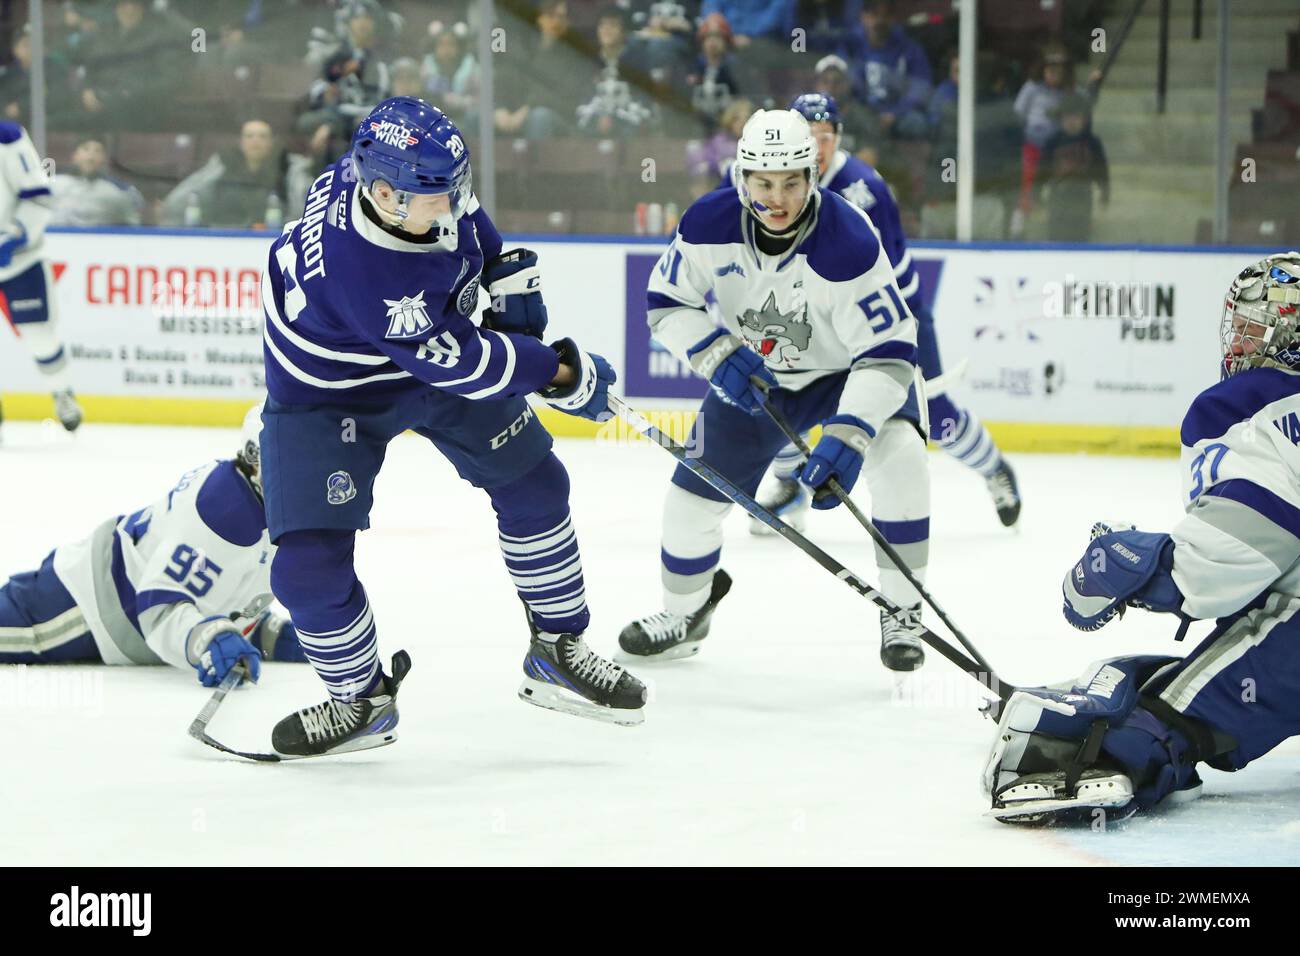 Mississauga, Canada. 25th Feb, 2024. Feb 25 2024, Mississauga Ontario Canada, The Mississauga Steelheads Beat the Sudbury Wolves 4-3 in regulation.(Editorial Only)Gabriel Chiarot(20) of the Mississaua Steelheads. Credit: Luke Durda/Alamy Live News Stock Photo